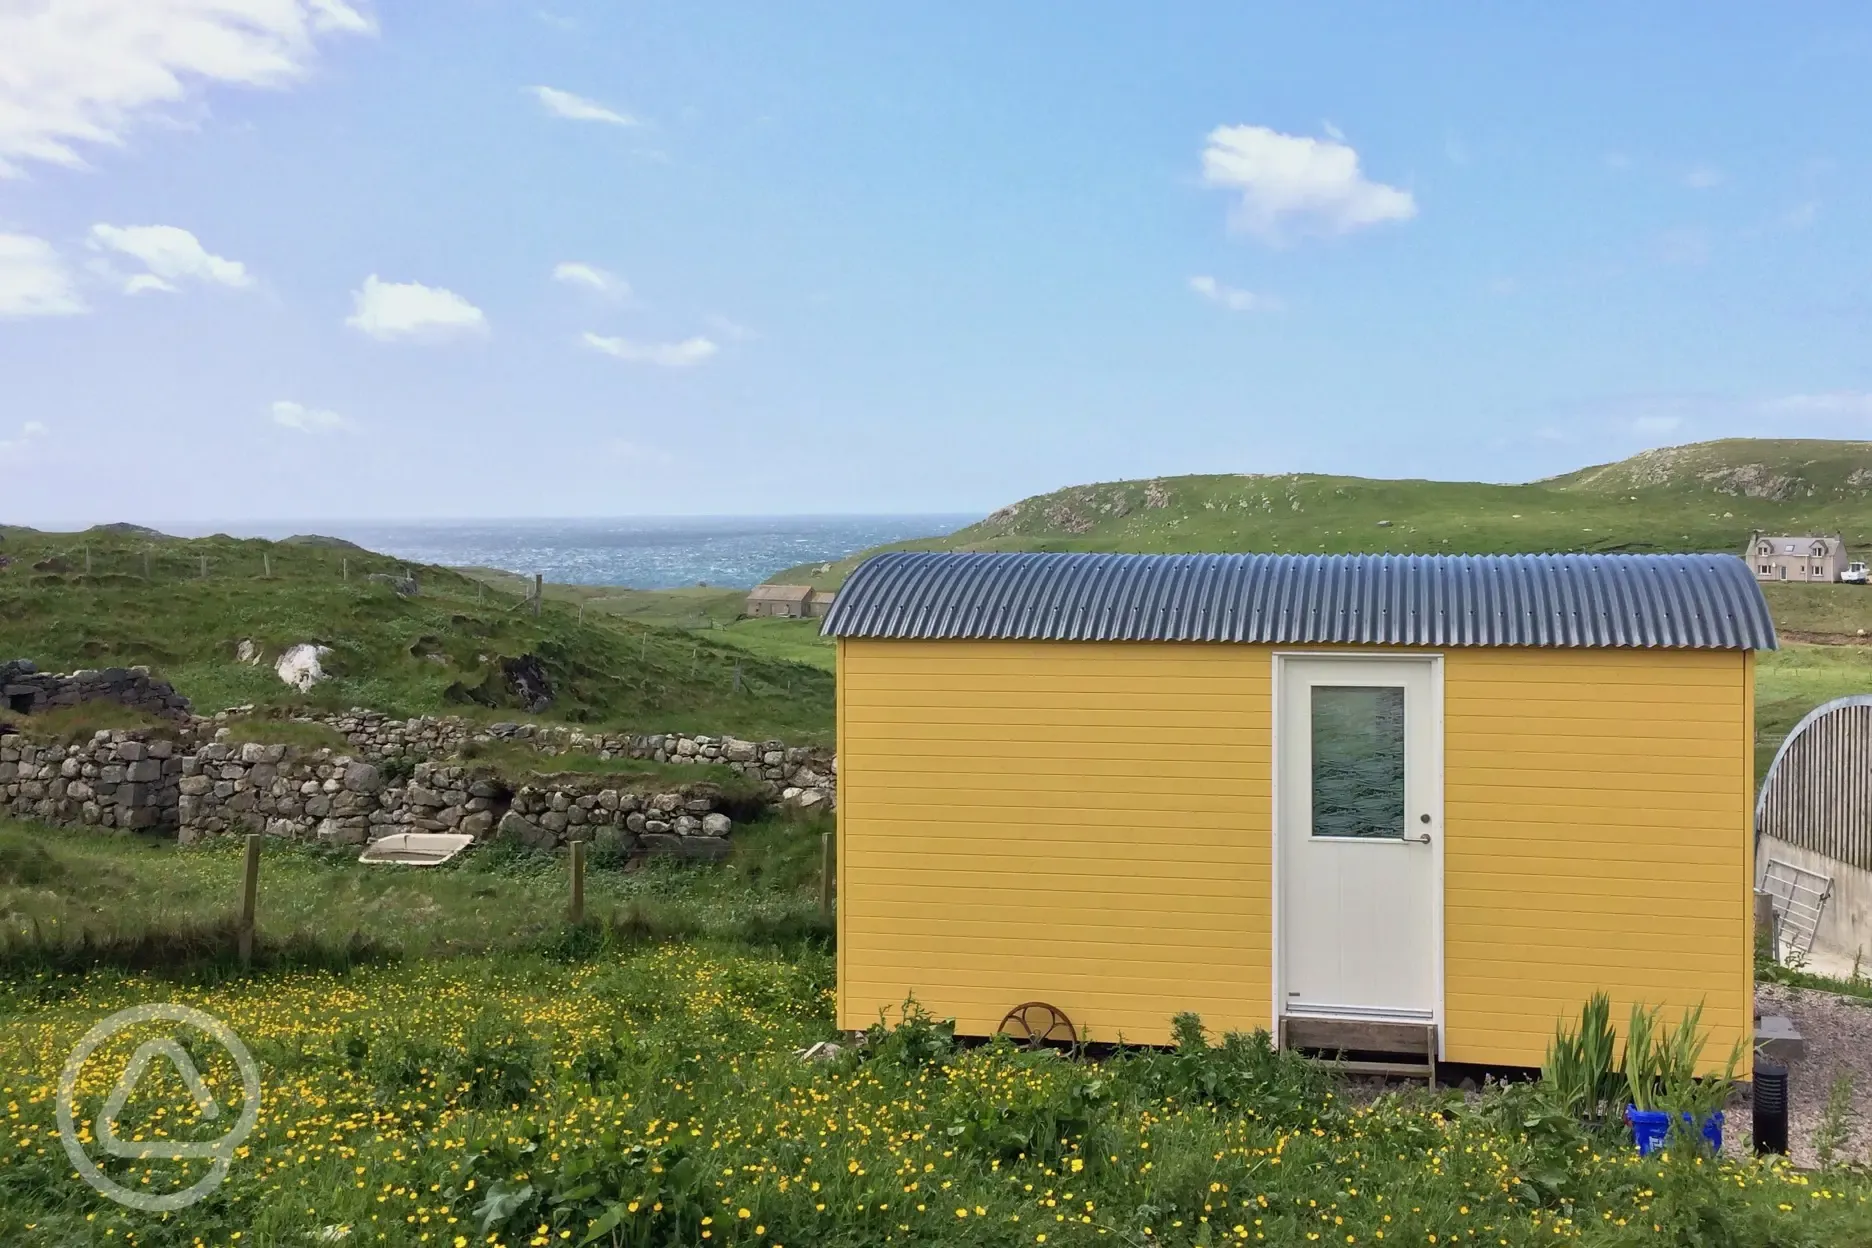 Shepherd's Hut looking out to the North Atlantic Ocean